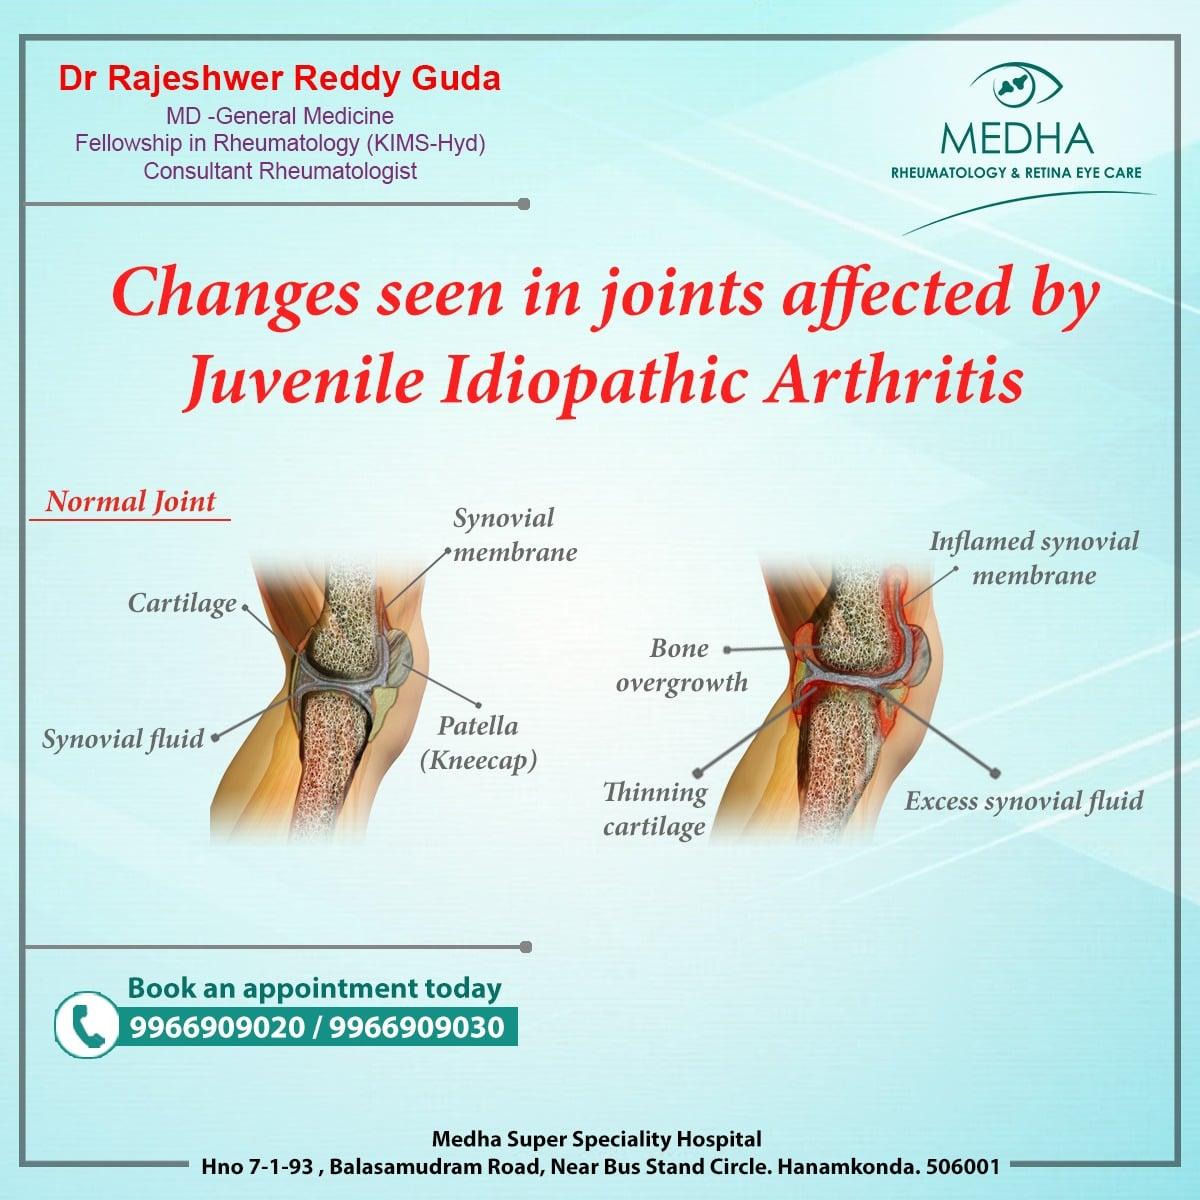 Changes seen in JOINTS affected by JIA